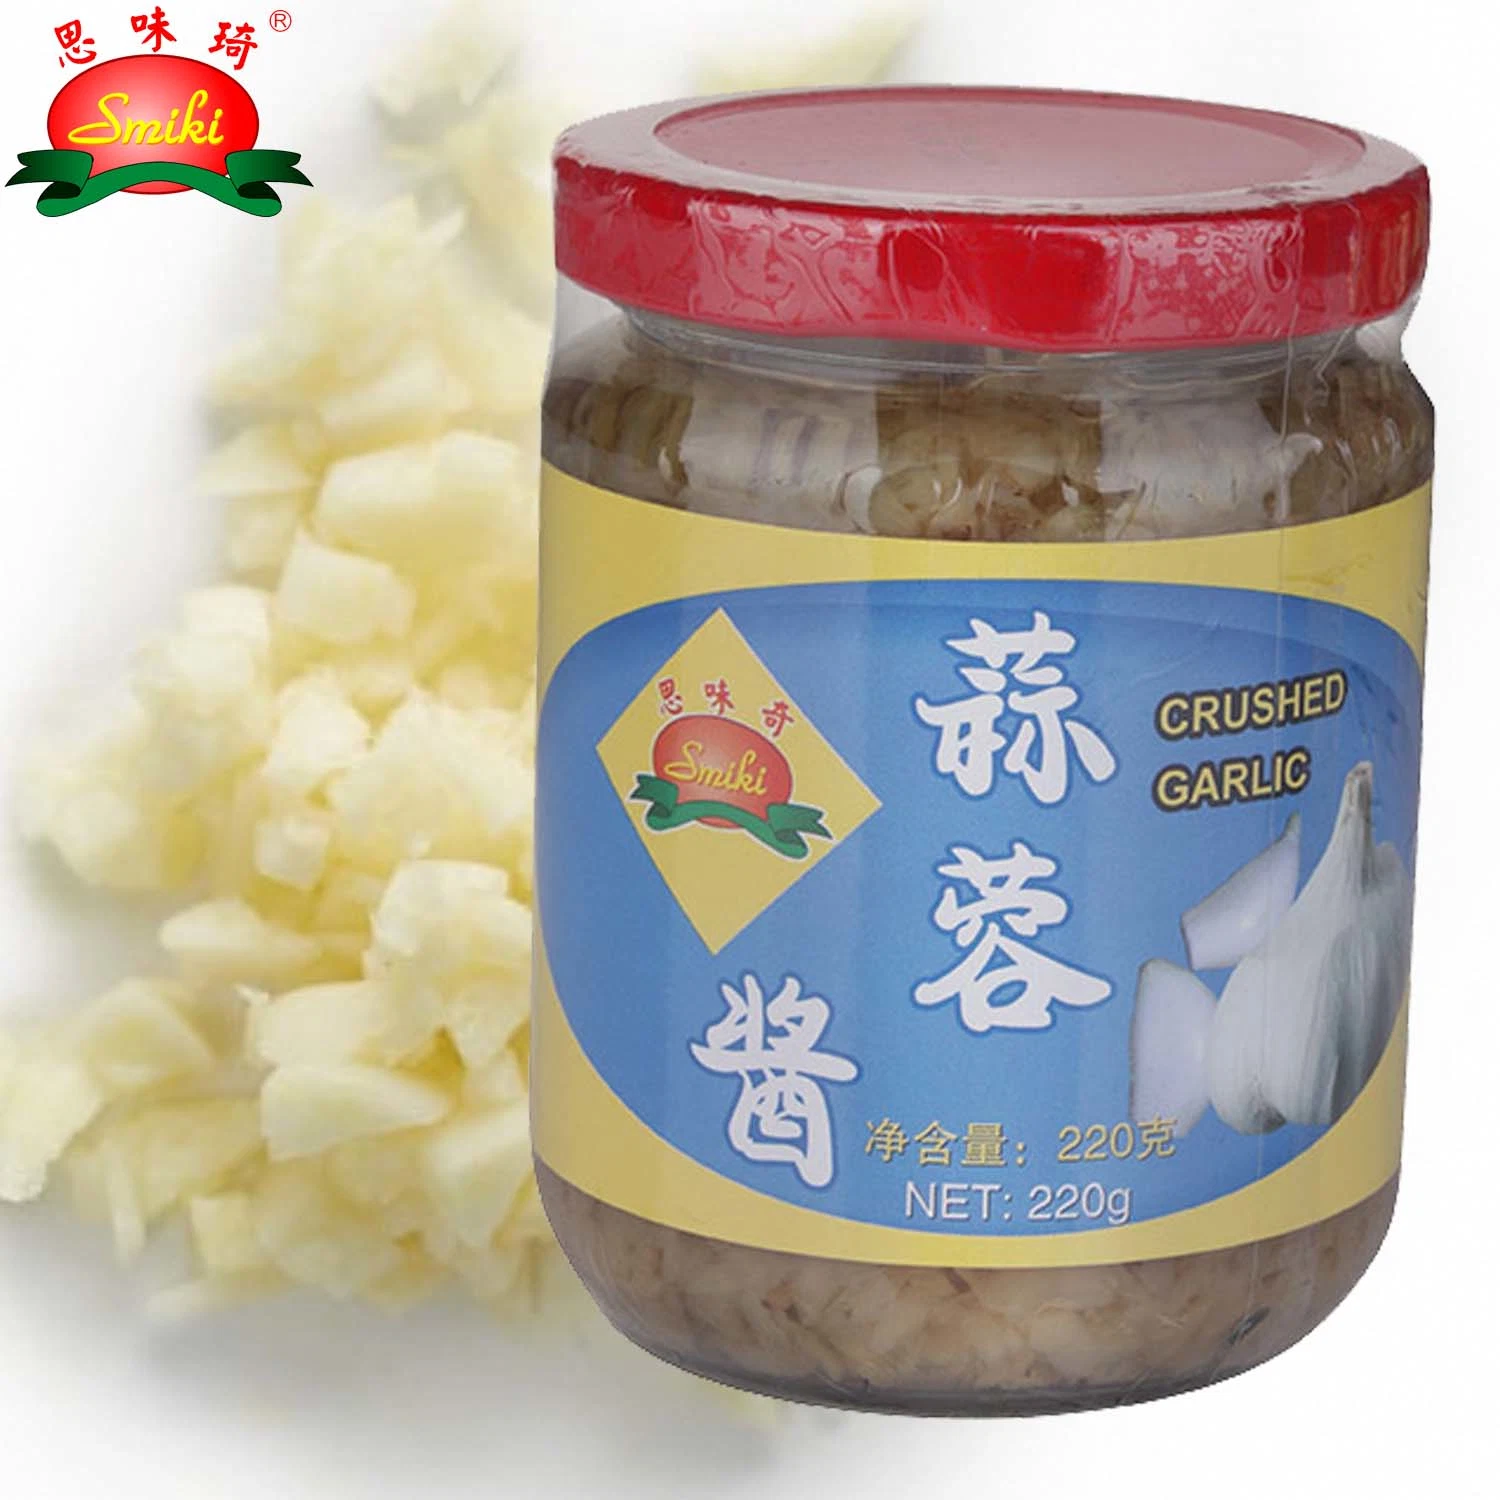 Non-GMO Crushed Garlic 220g for Chickens